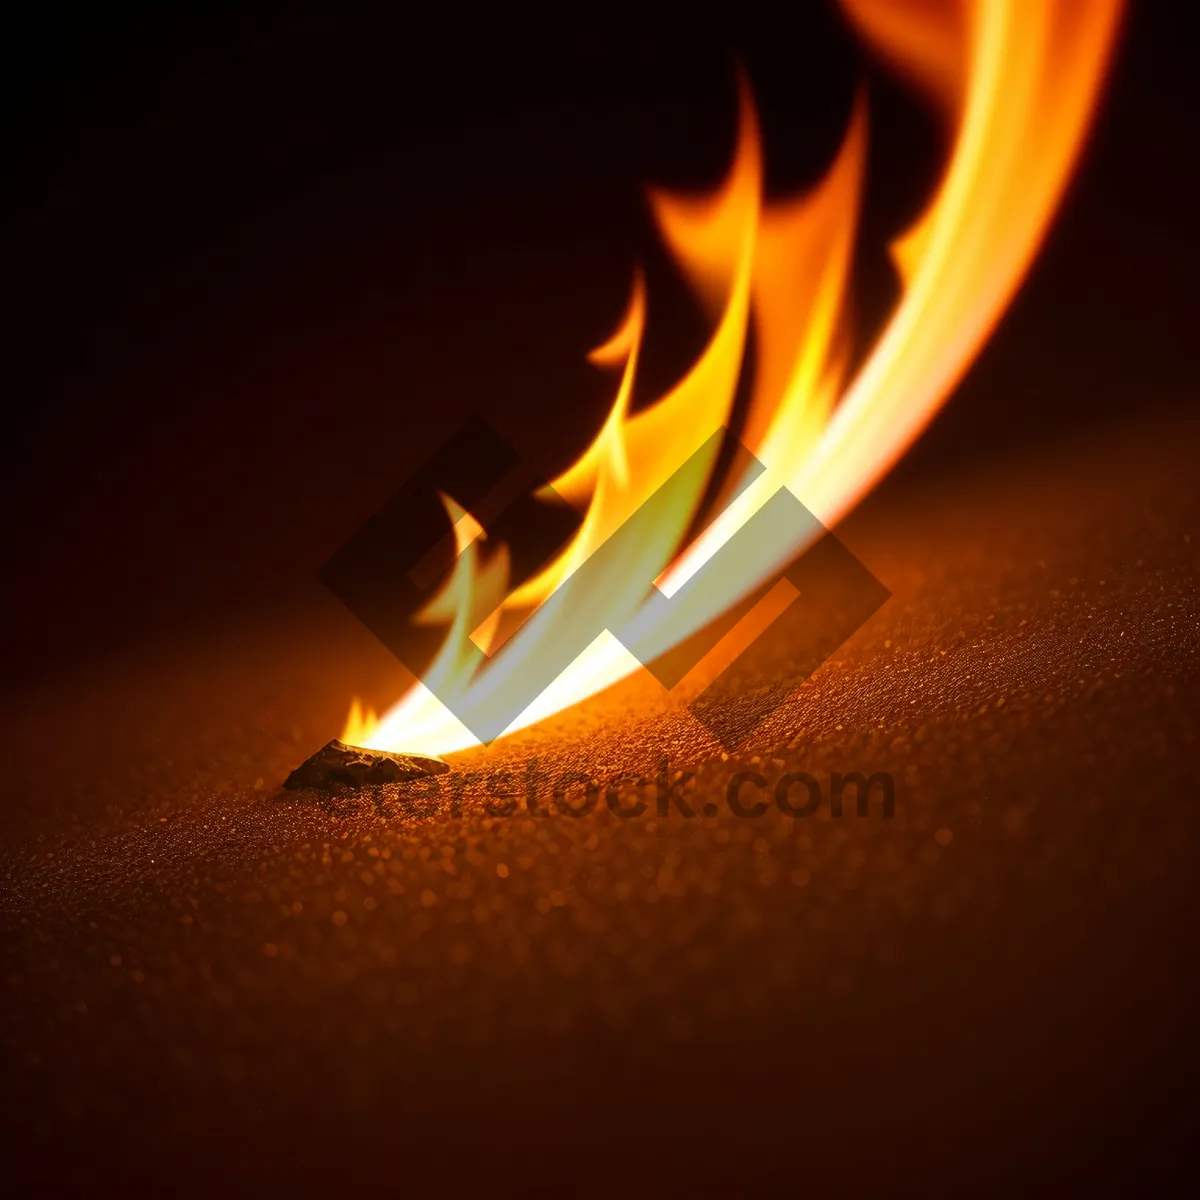 Picture of Blazing Matchstick: Fiery Light in the Darkness.